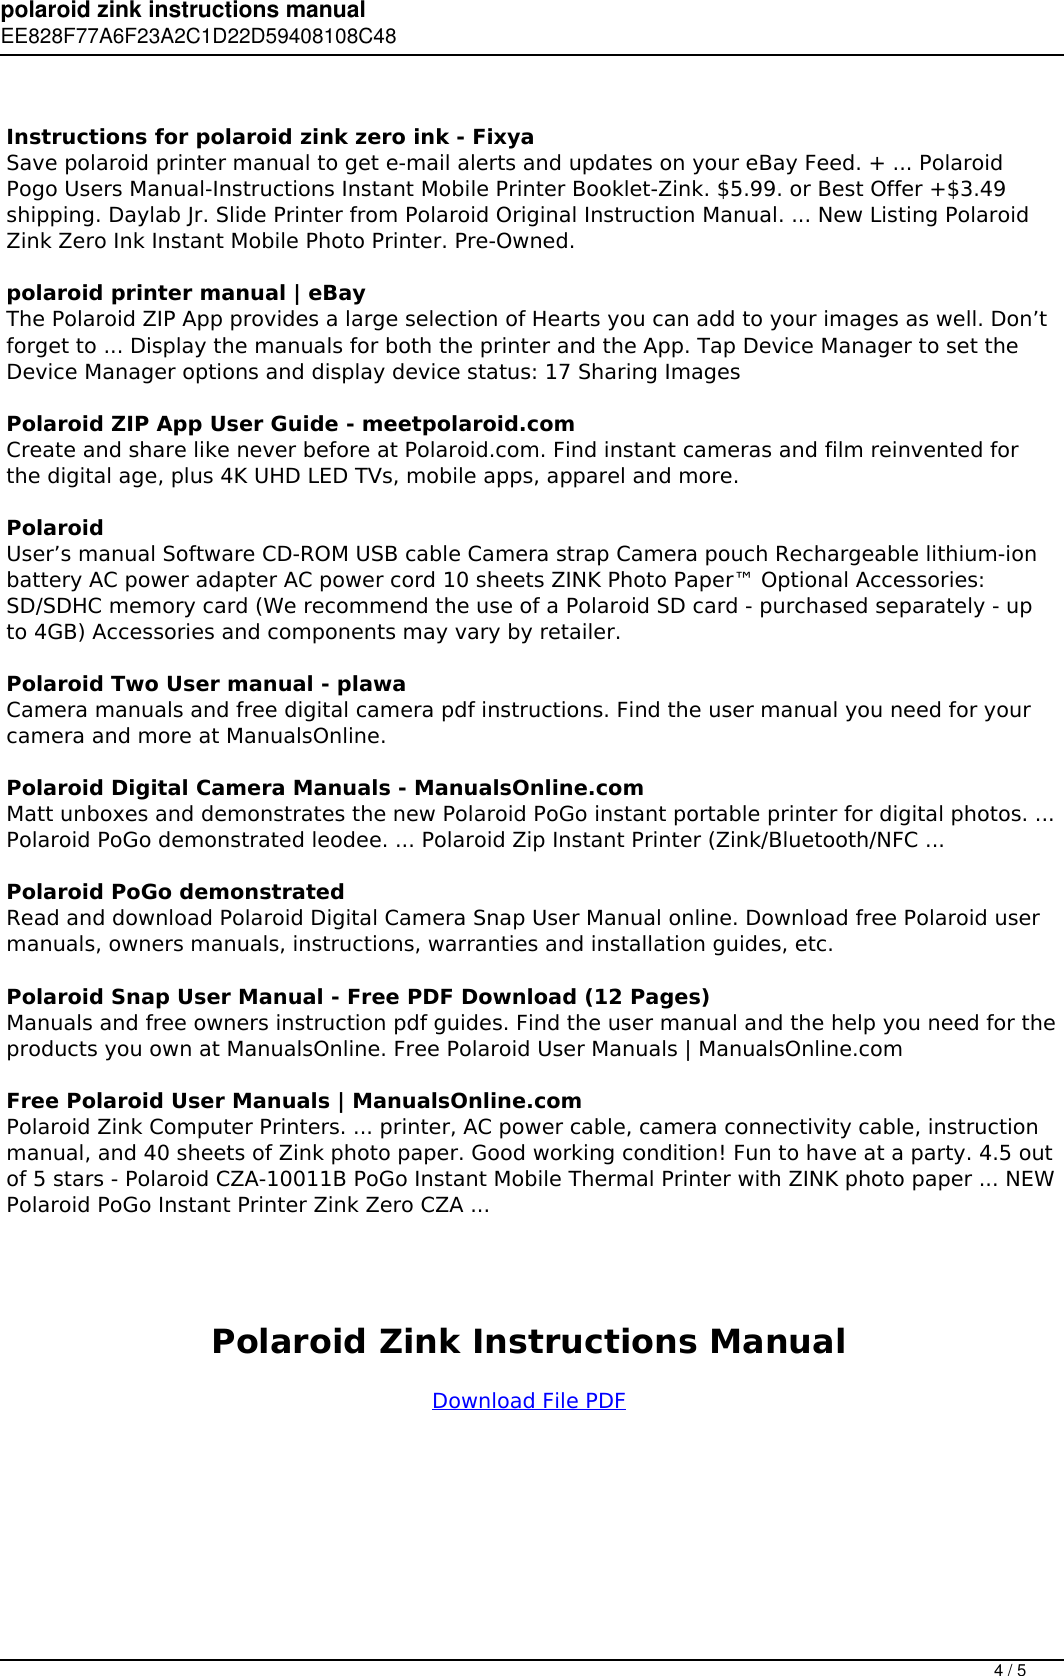 Page 4 of 5 - Polaroid Zink Instructions Manual